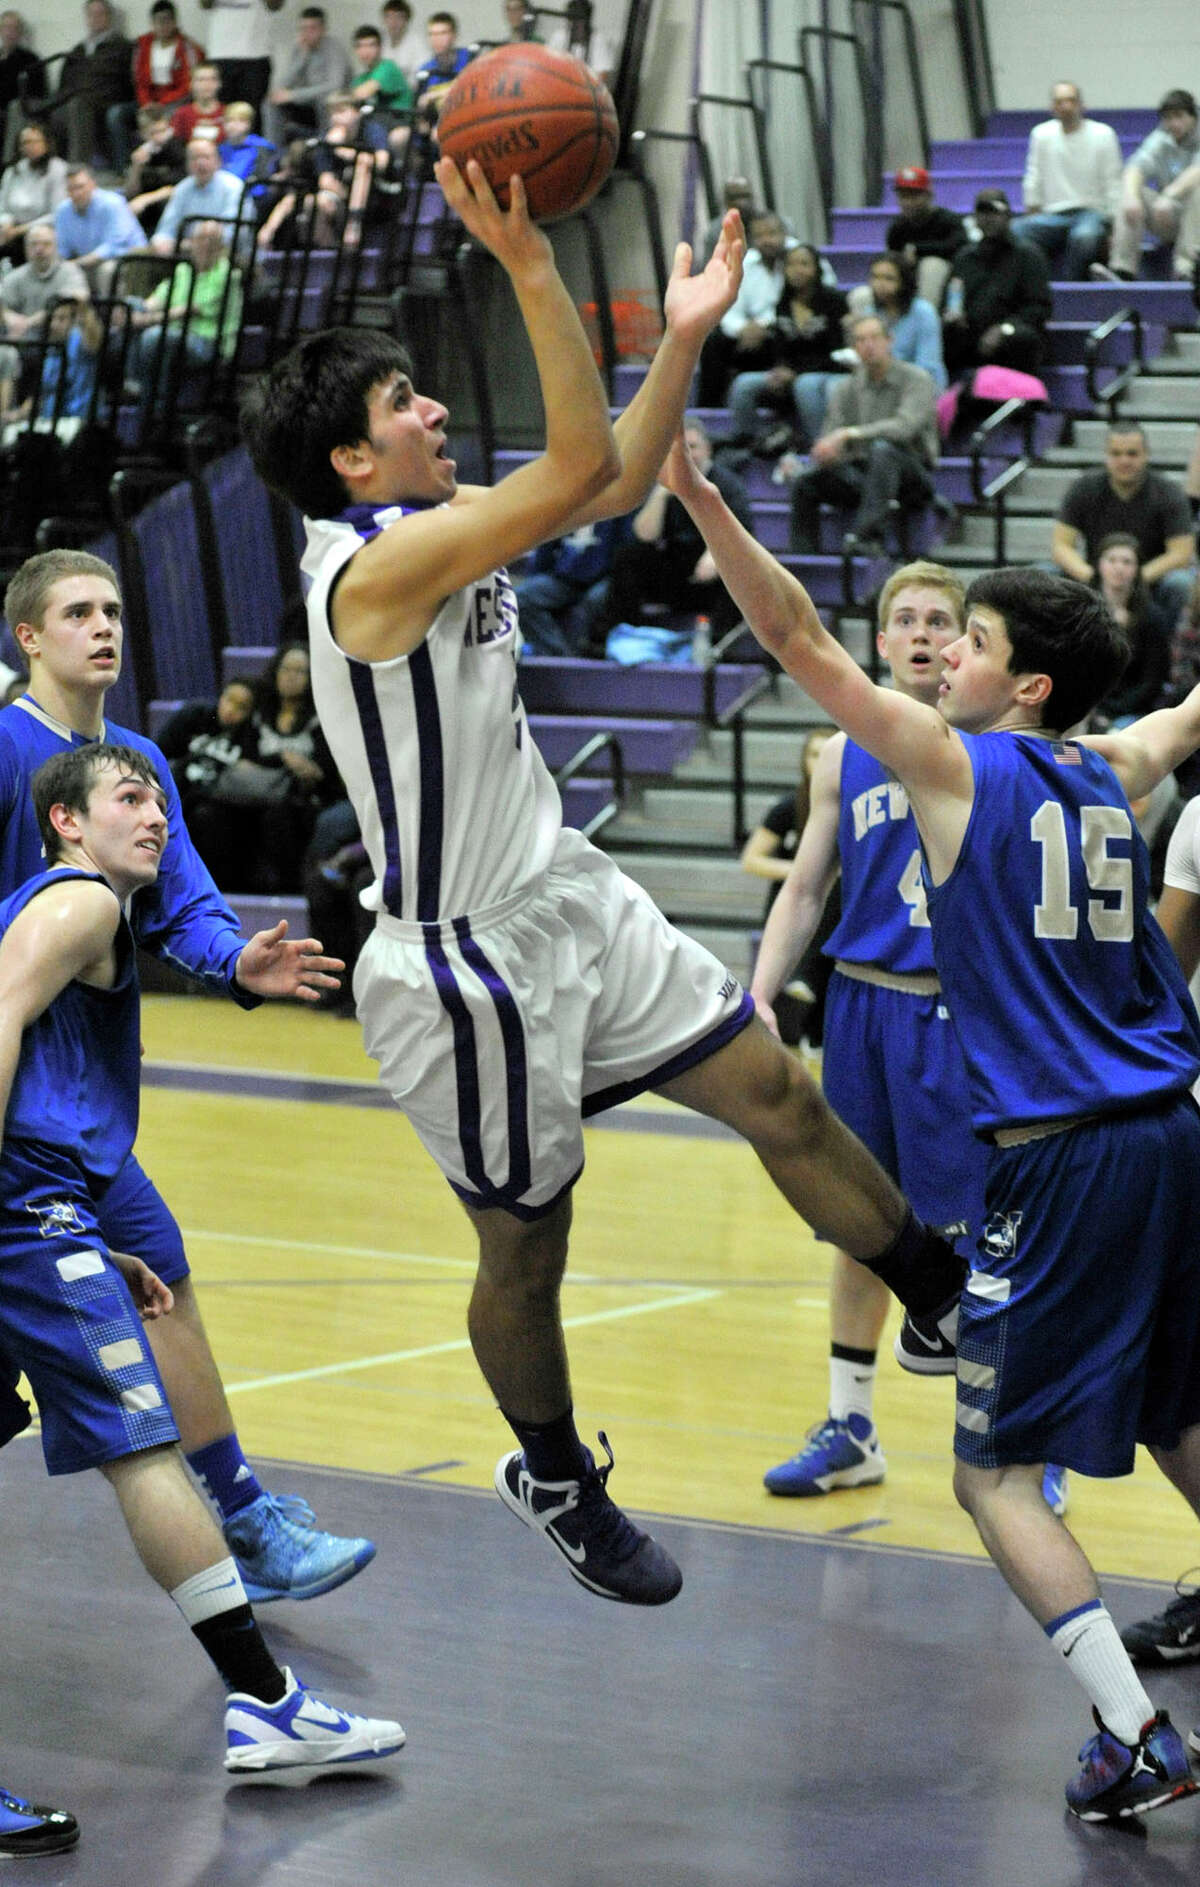 Westhill's Evan Skoparantzas shoots a fade-away jumper in front of Newtown's Gavin Scallon during their game at Westhill High School on Wednesday, March 6, 2013.